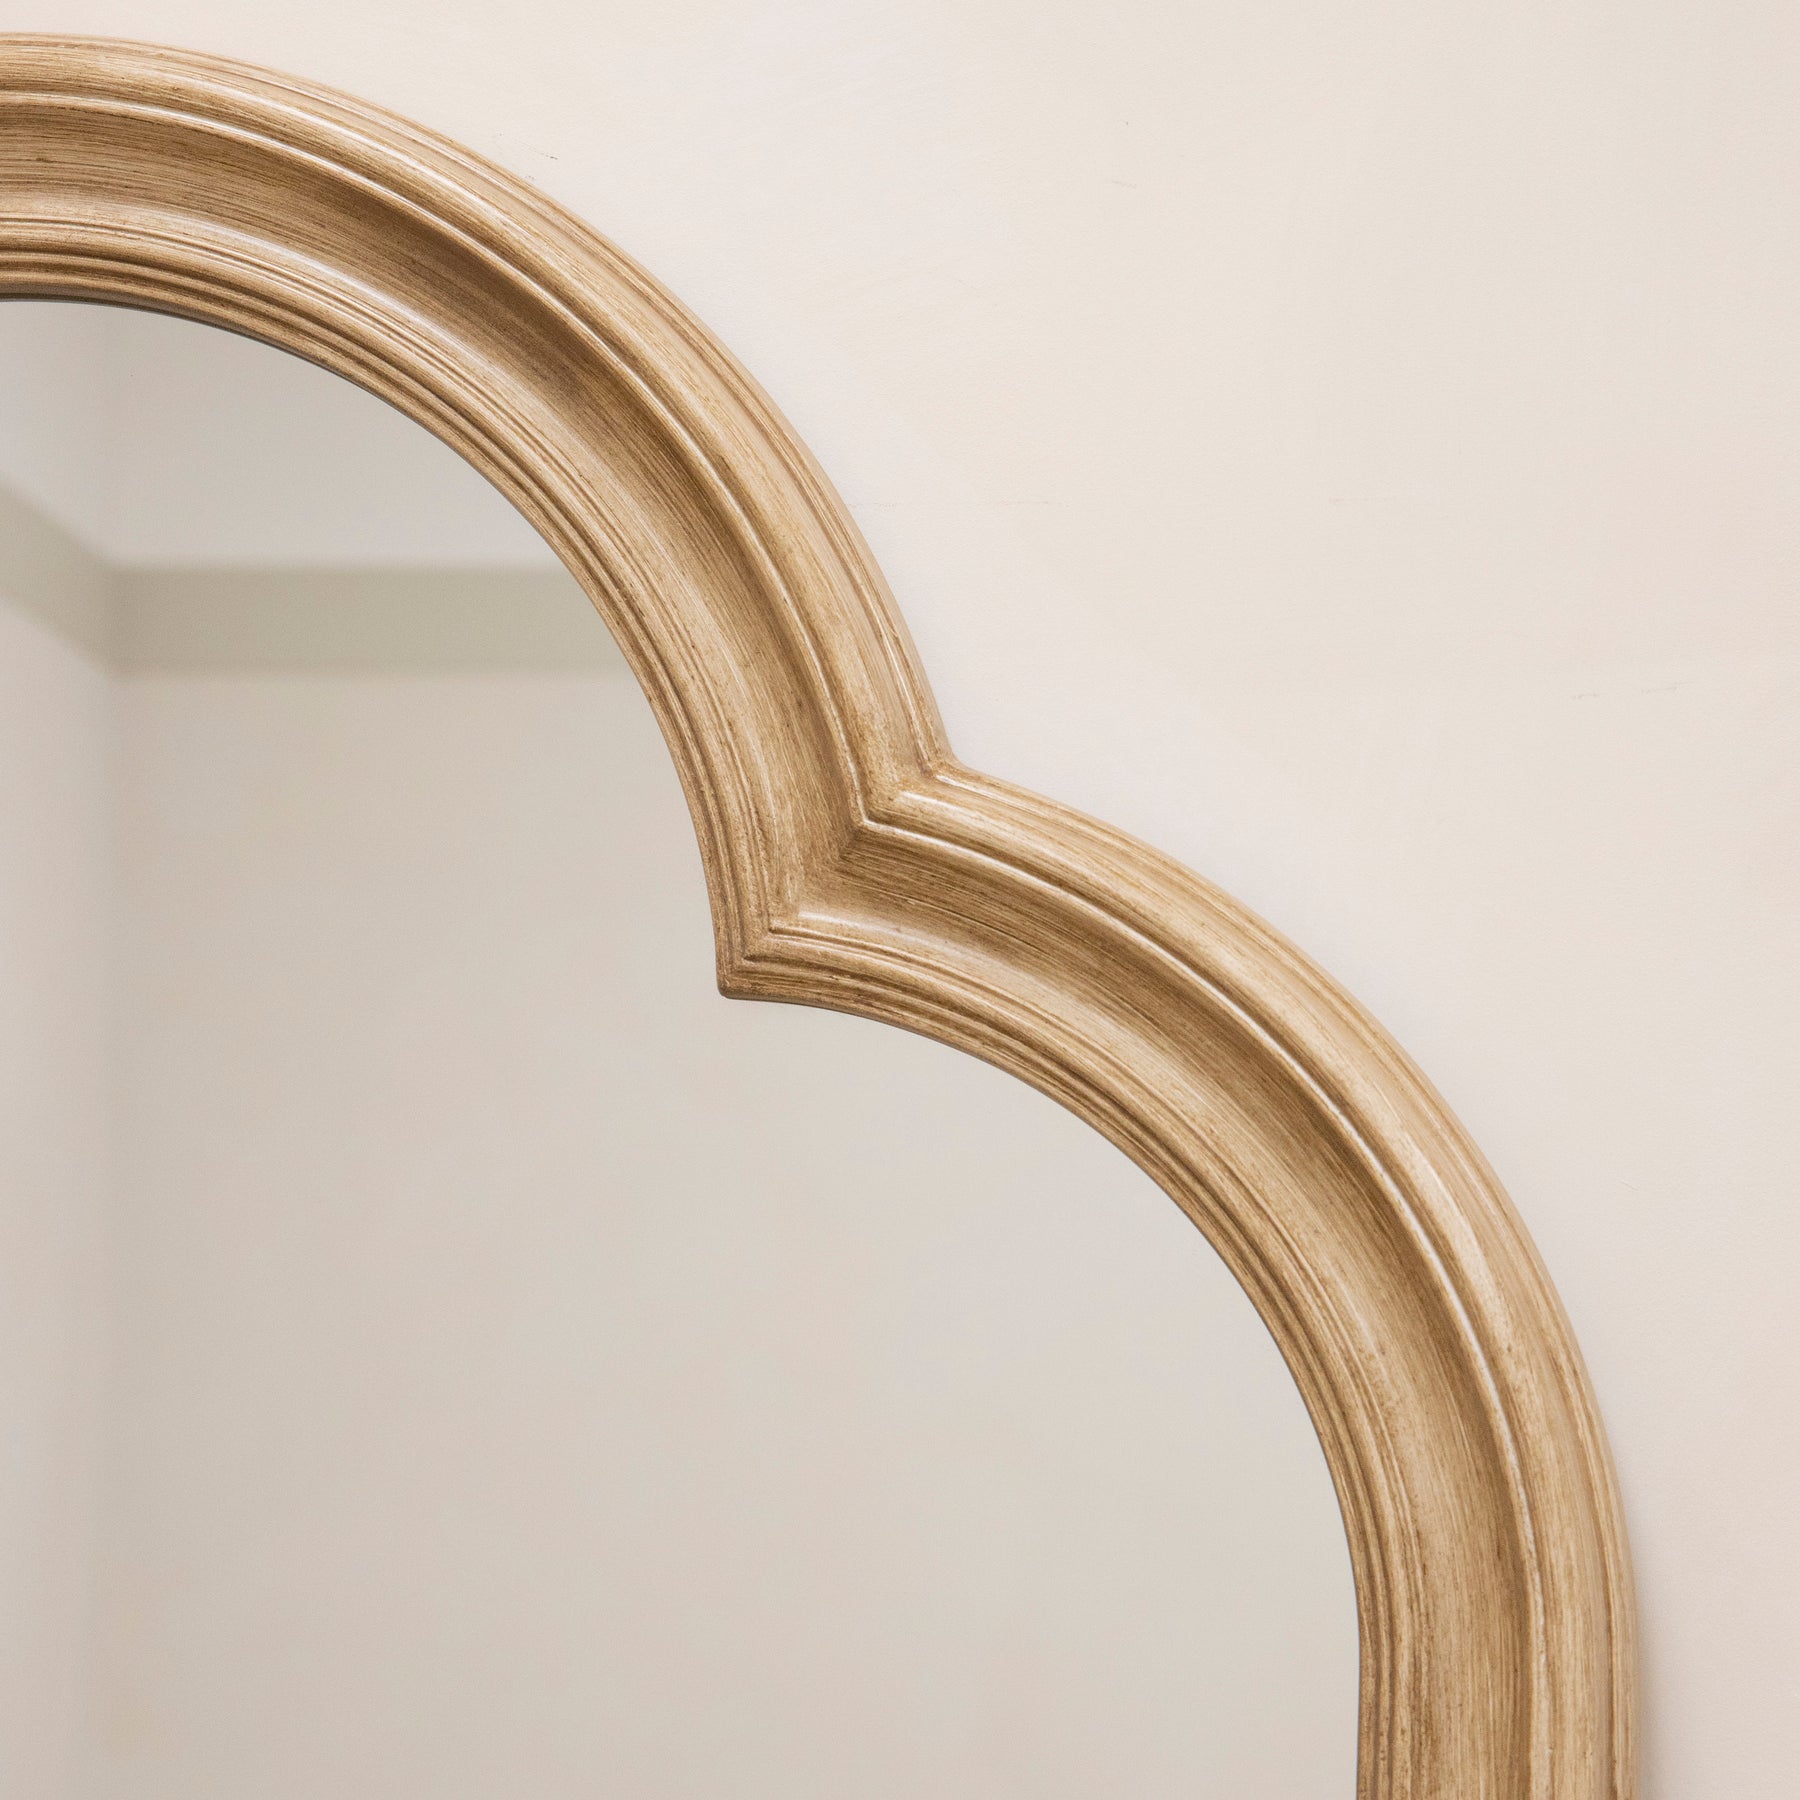 Washed Wood Arched Full Length Mirror detail shot of the frame's arch design